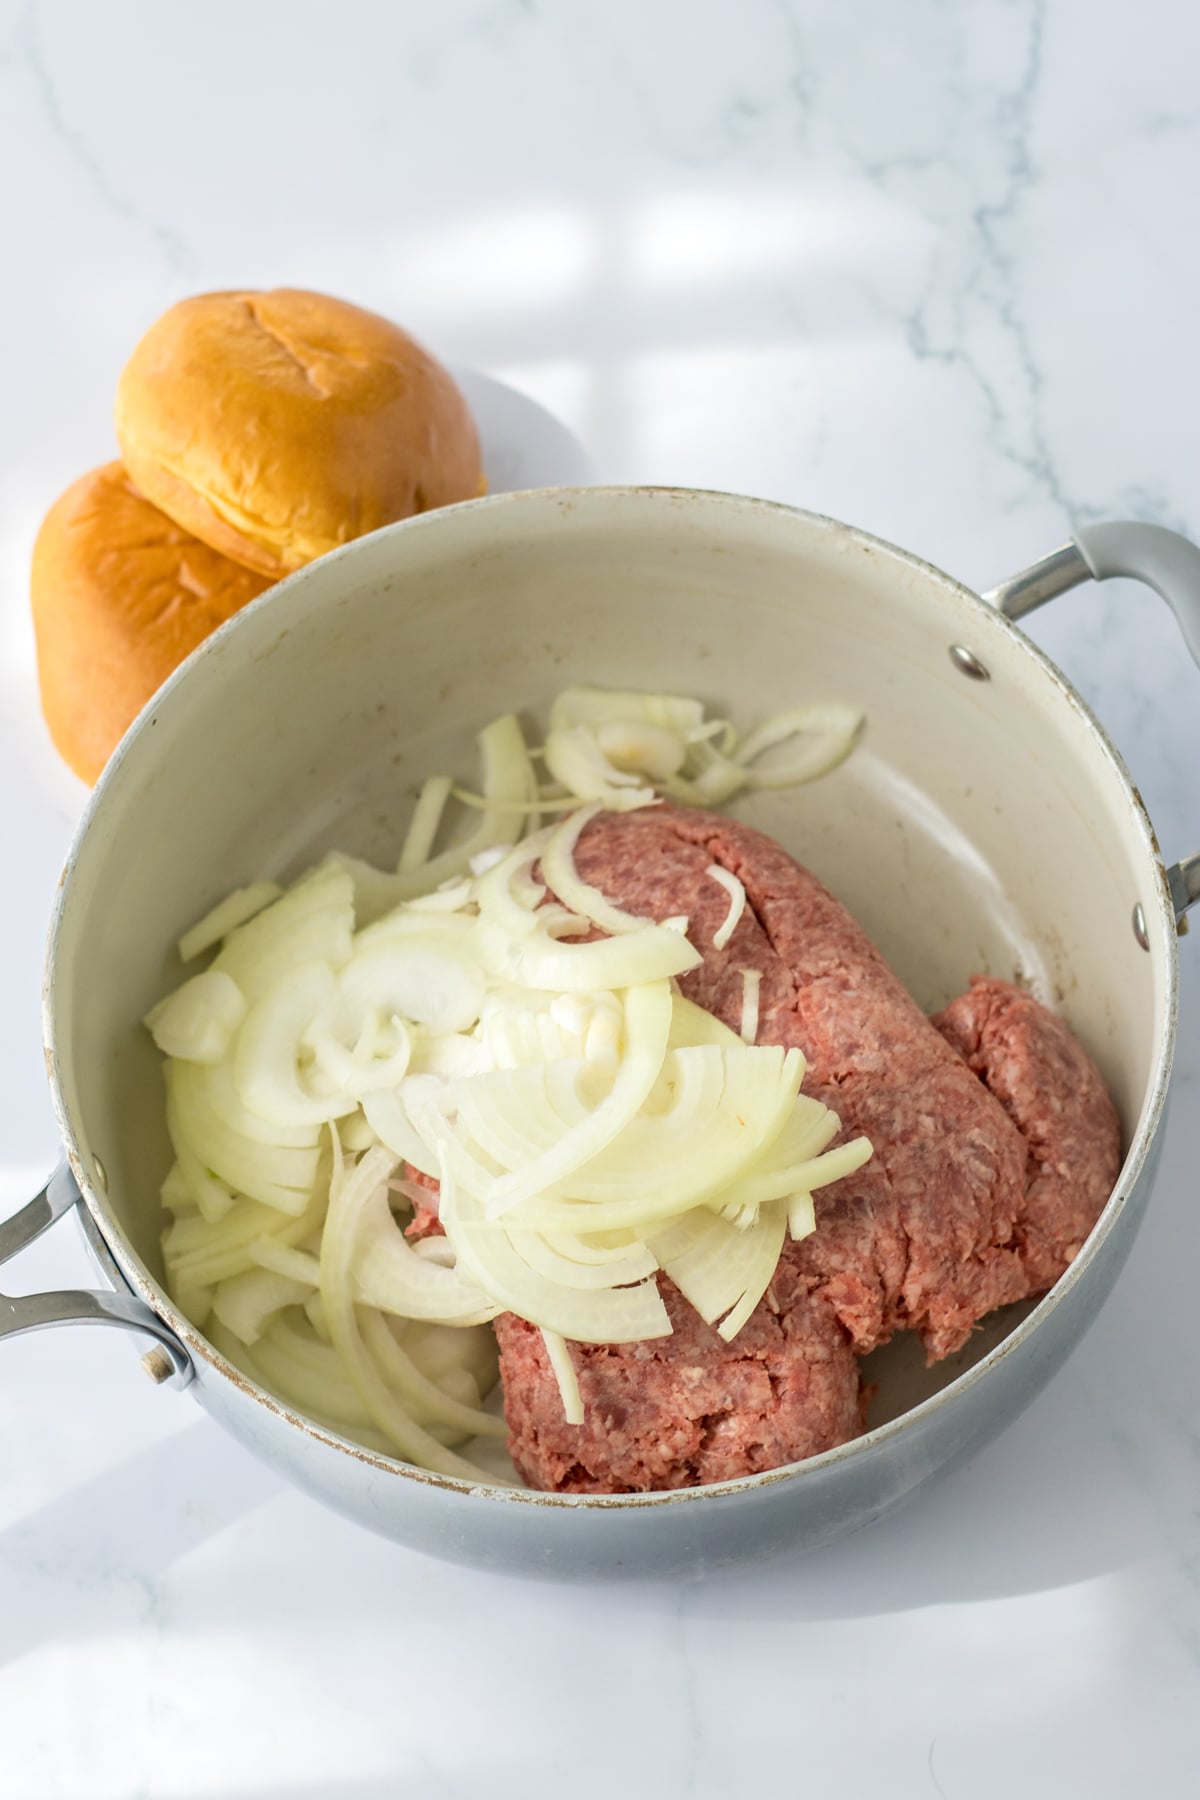 Browning the ground beef and onions is another process for Slow Cooker French Dip Sloppy Joes